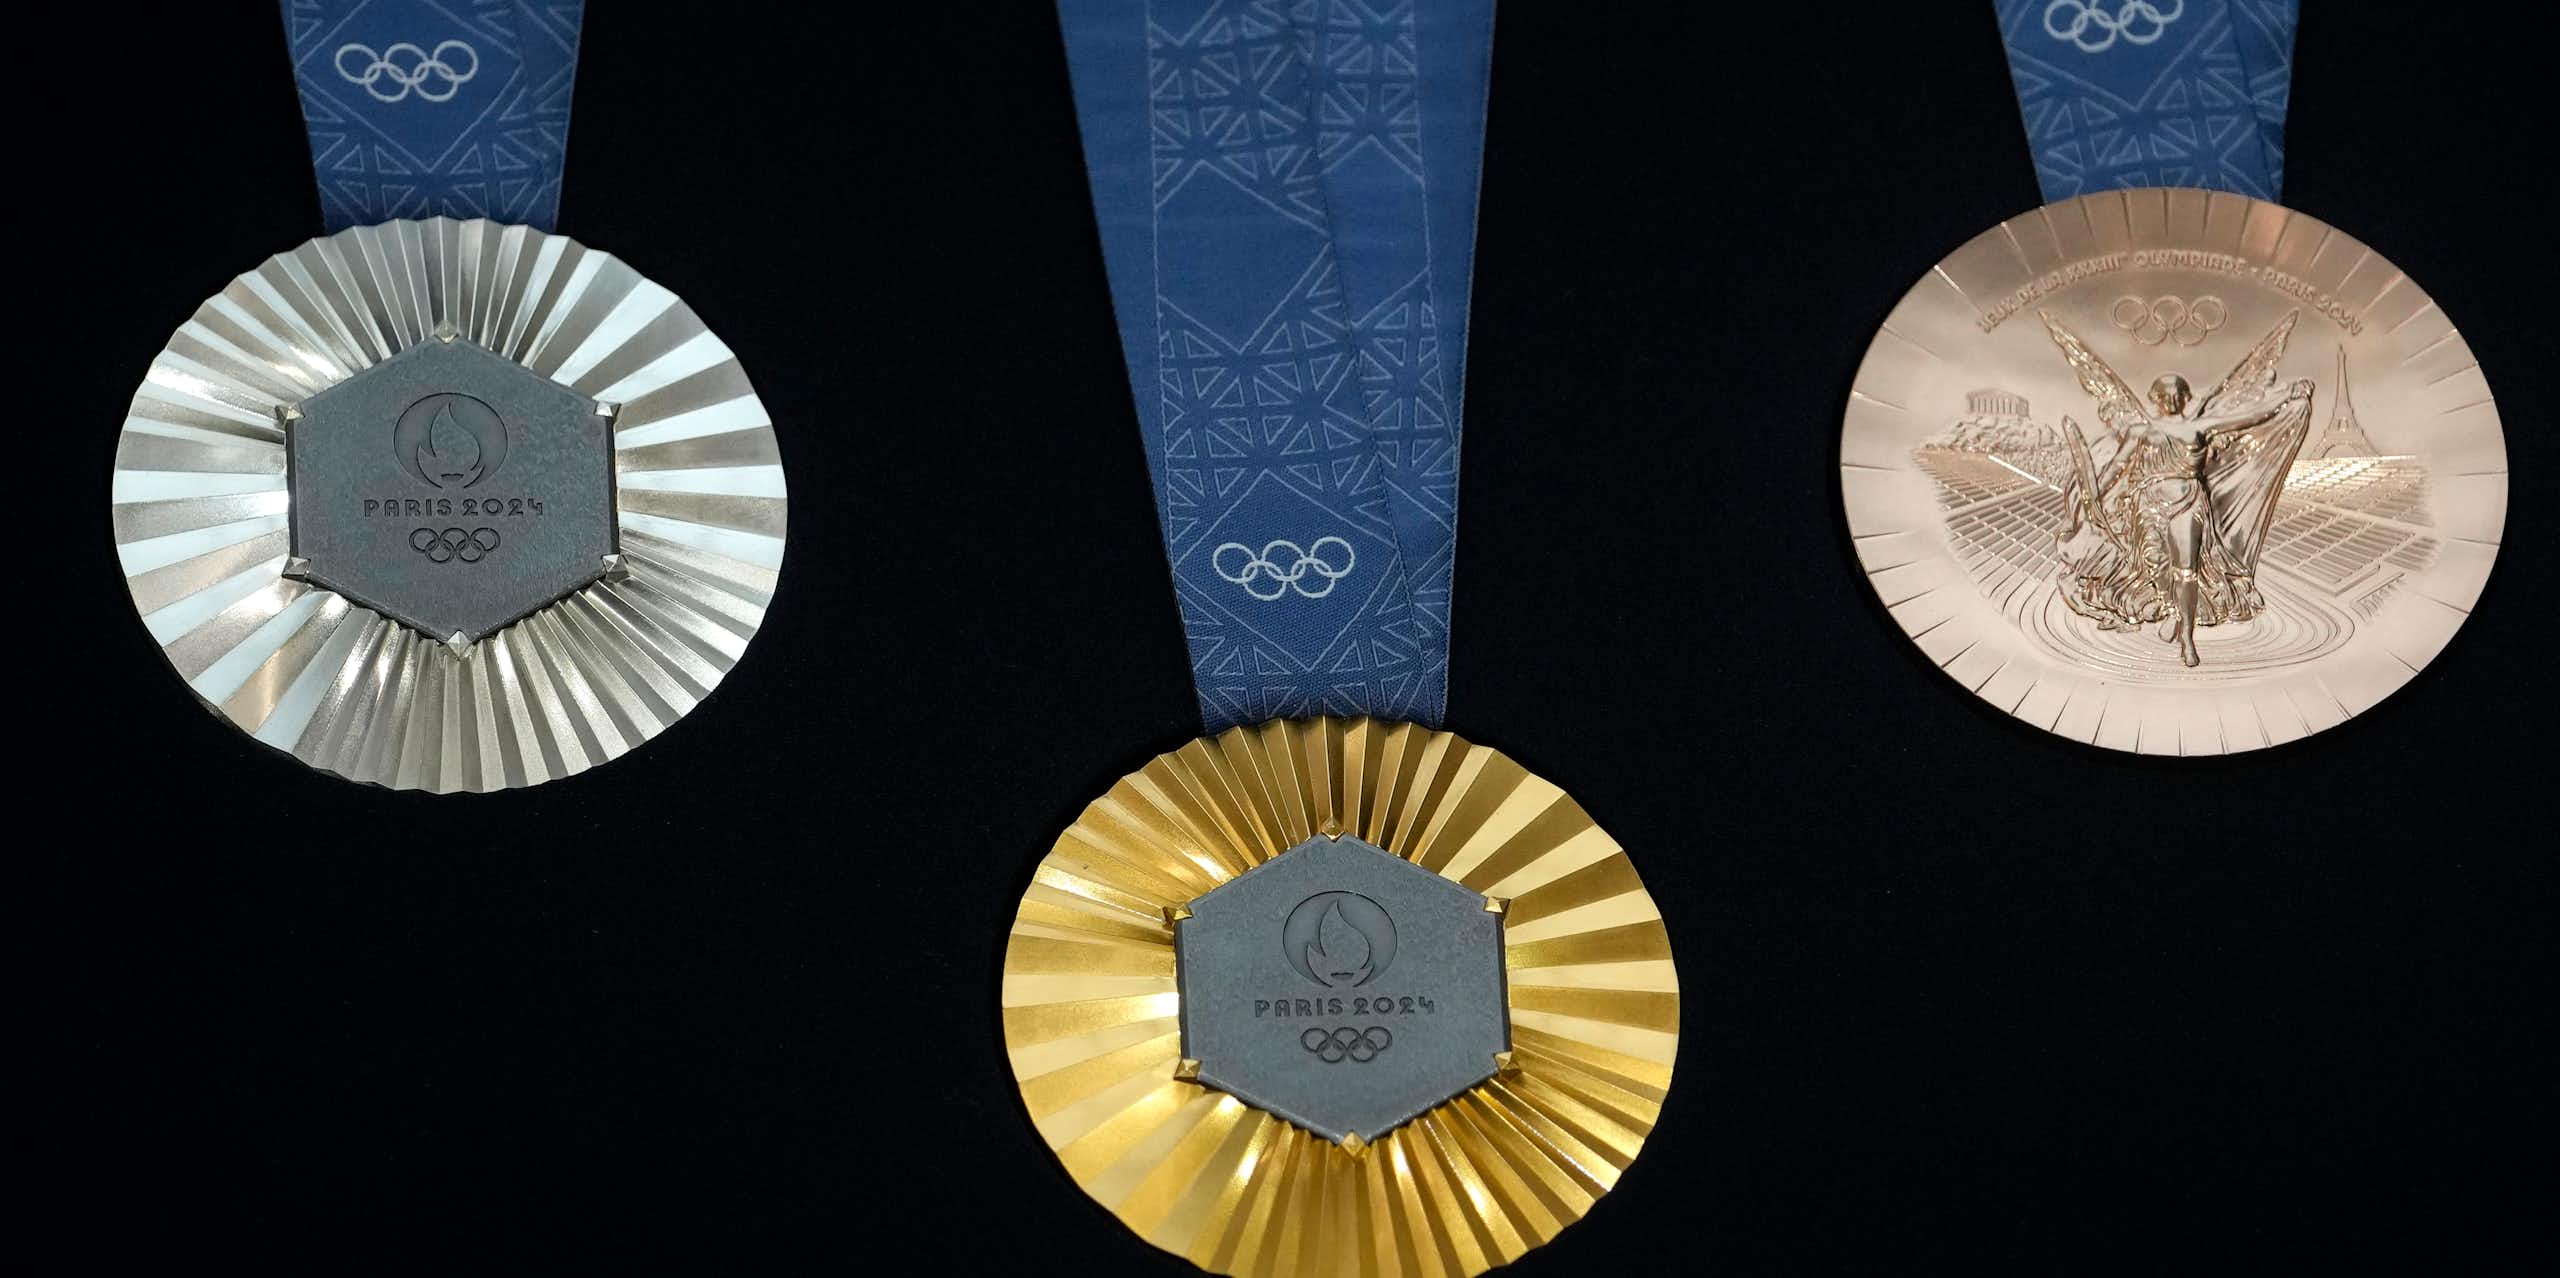 The Paris 2024 Olympic medals are showcased